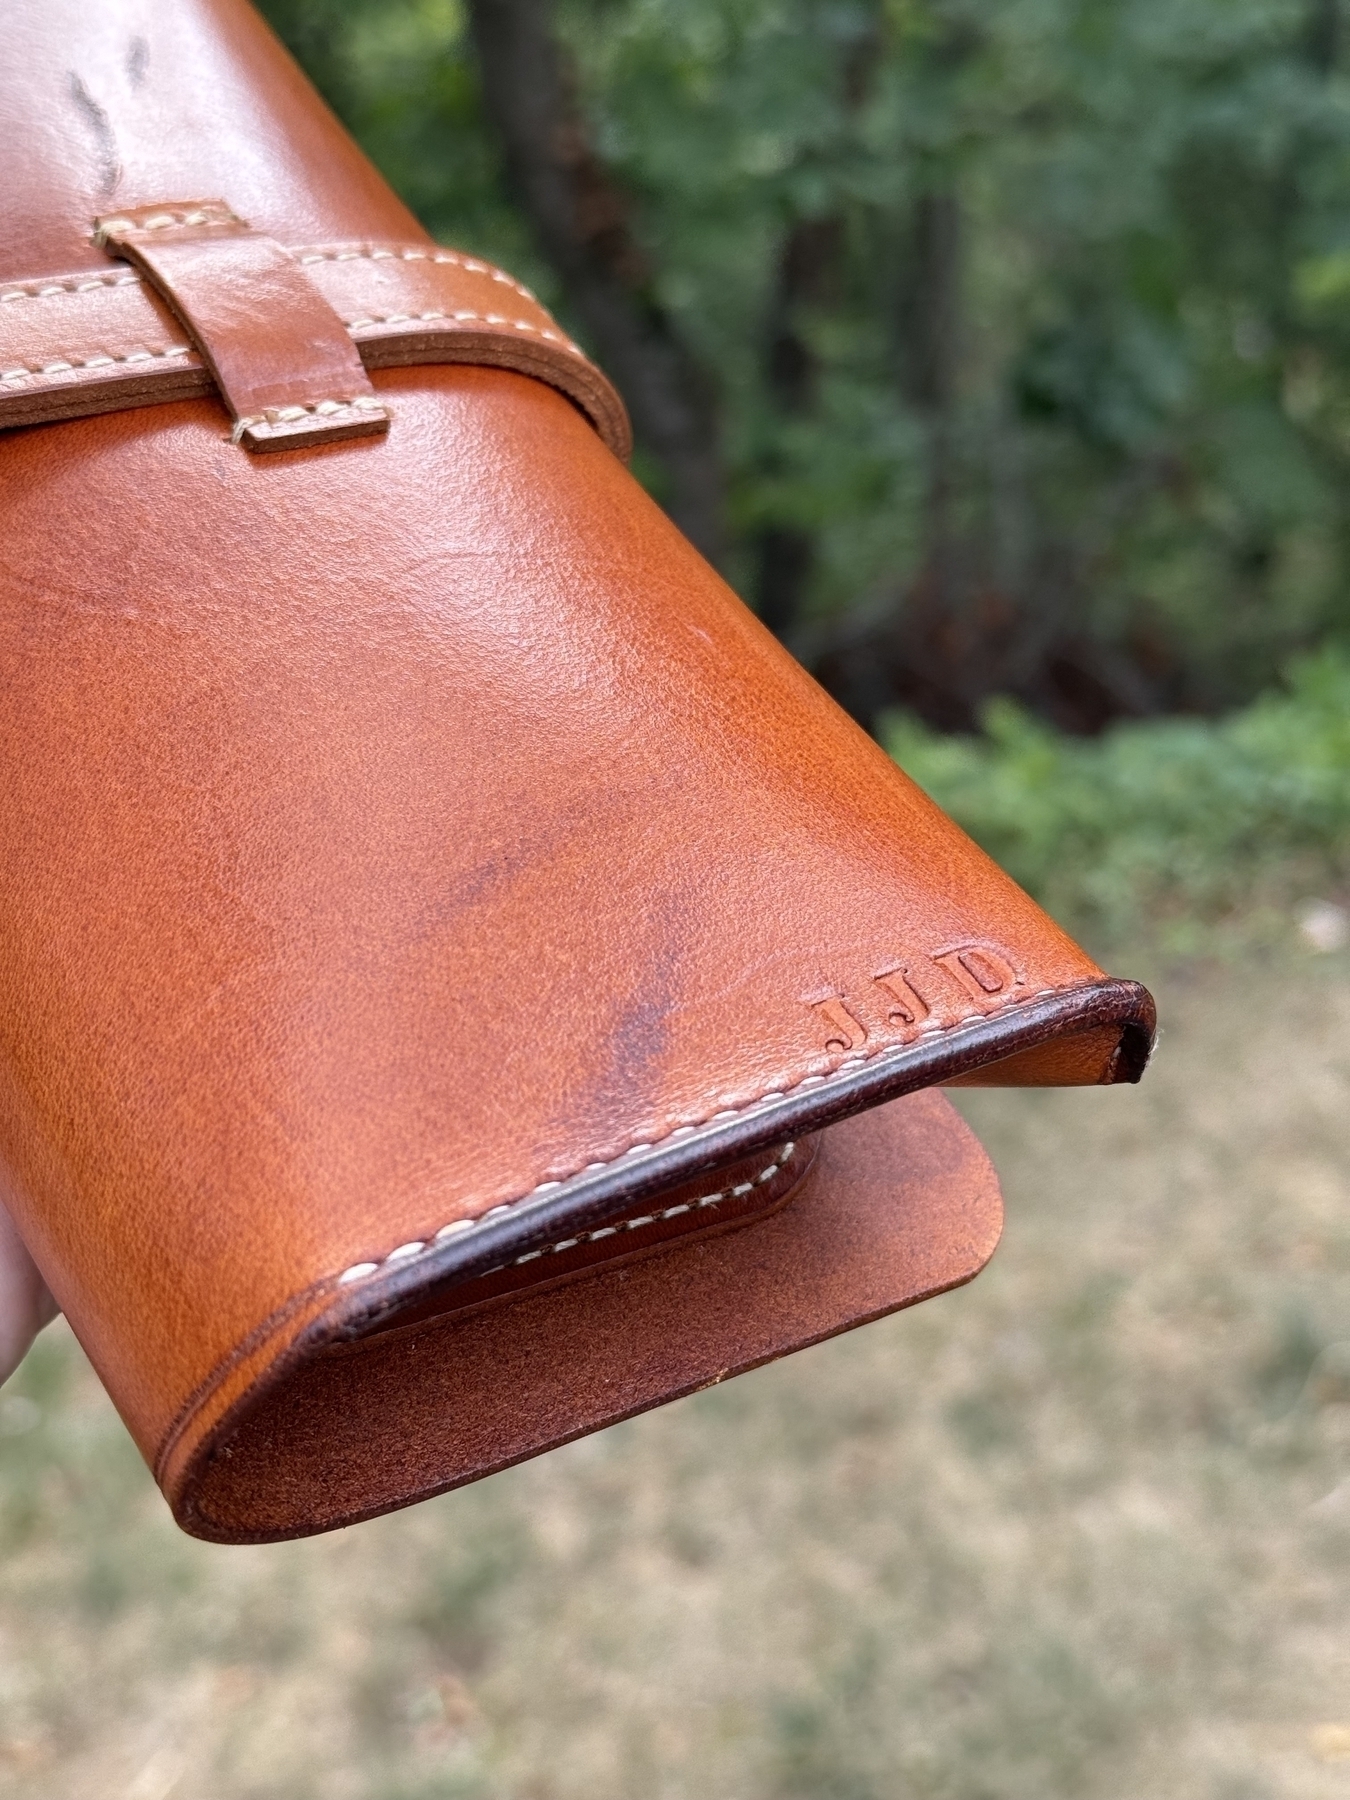 A person is holding a brown leather cigar case with initials "JJD" embossed on one end, blurred foliage in the background.